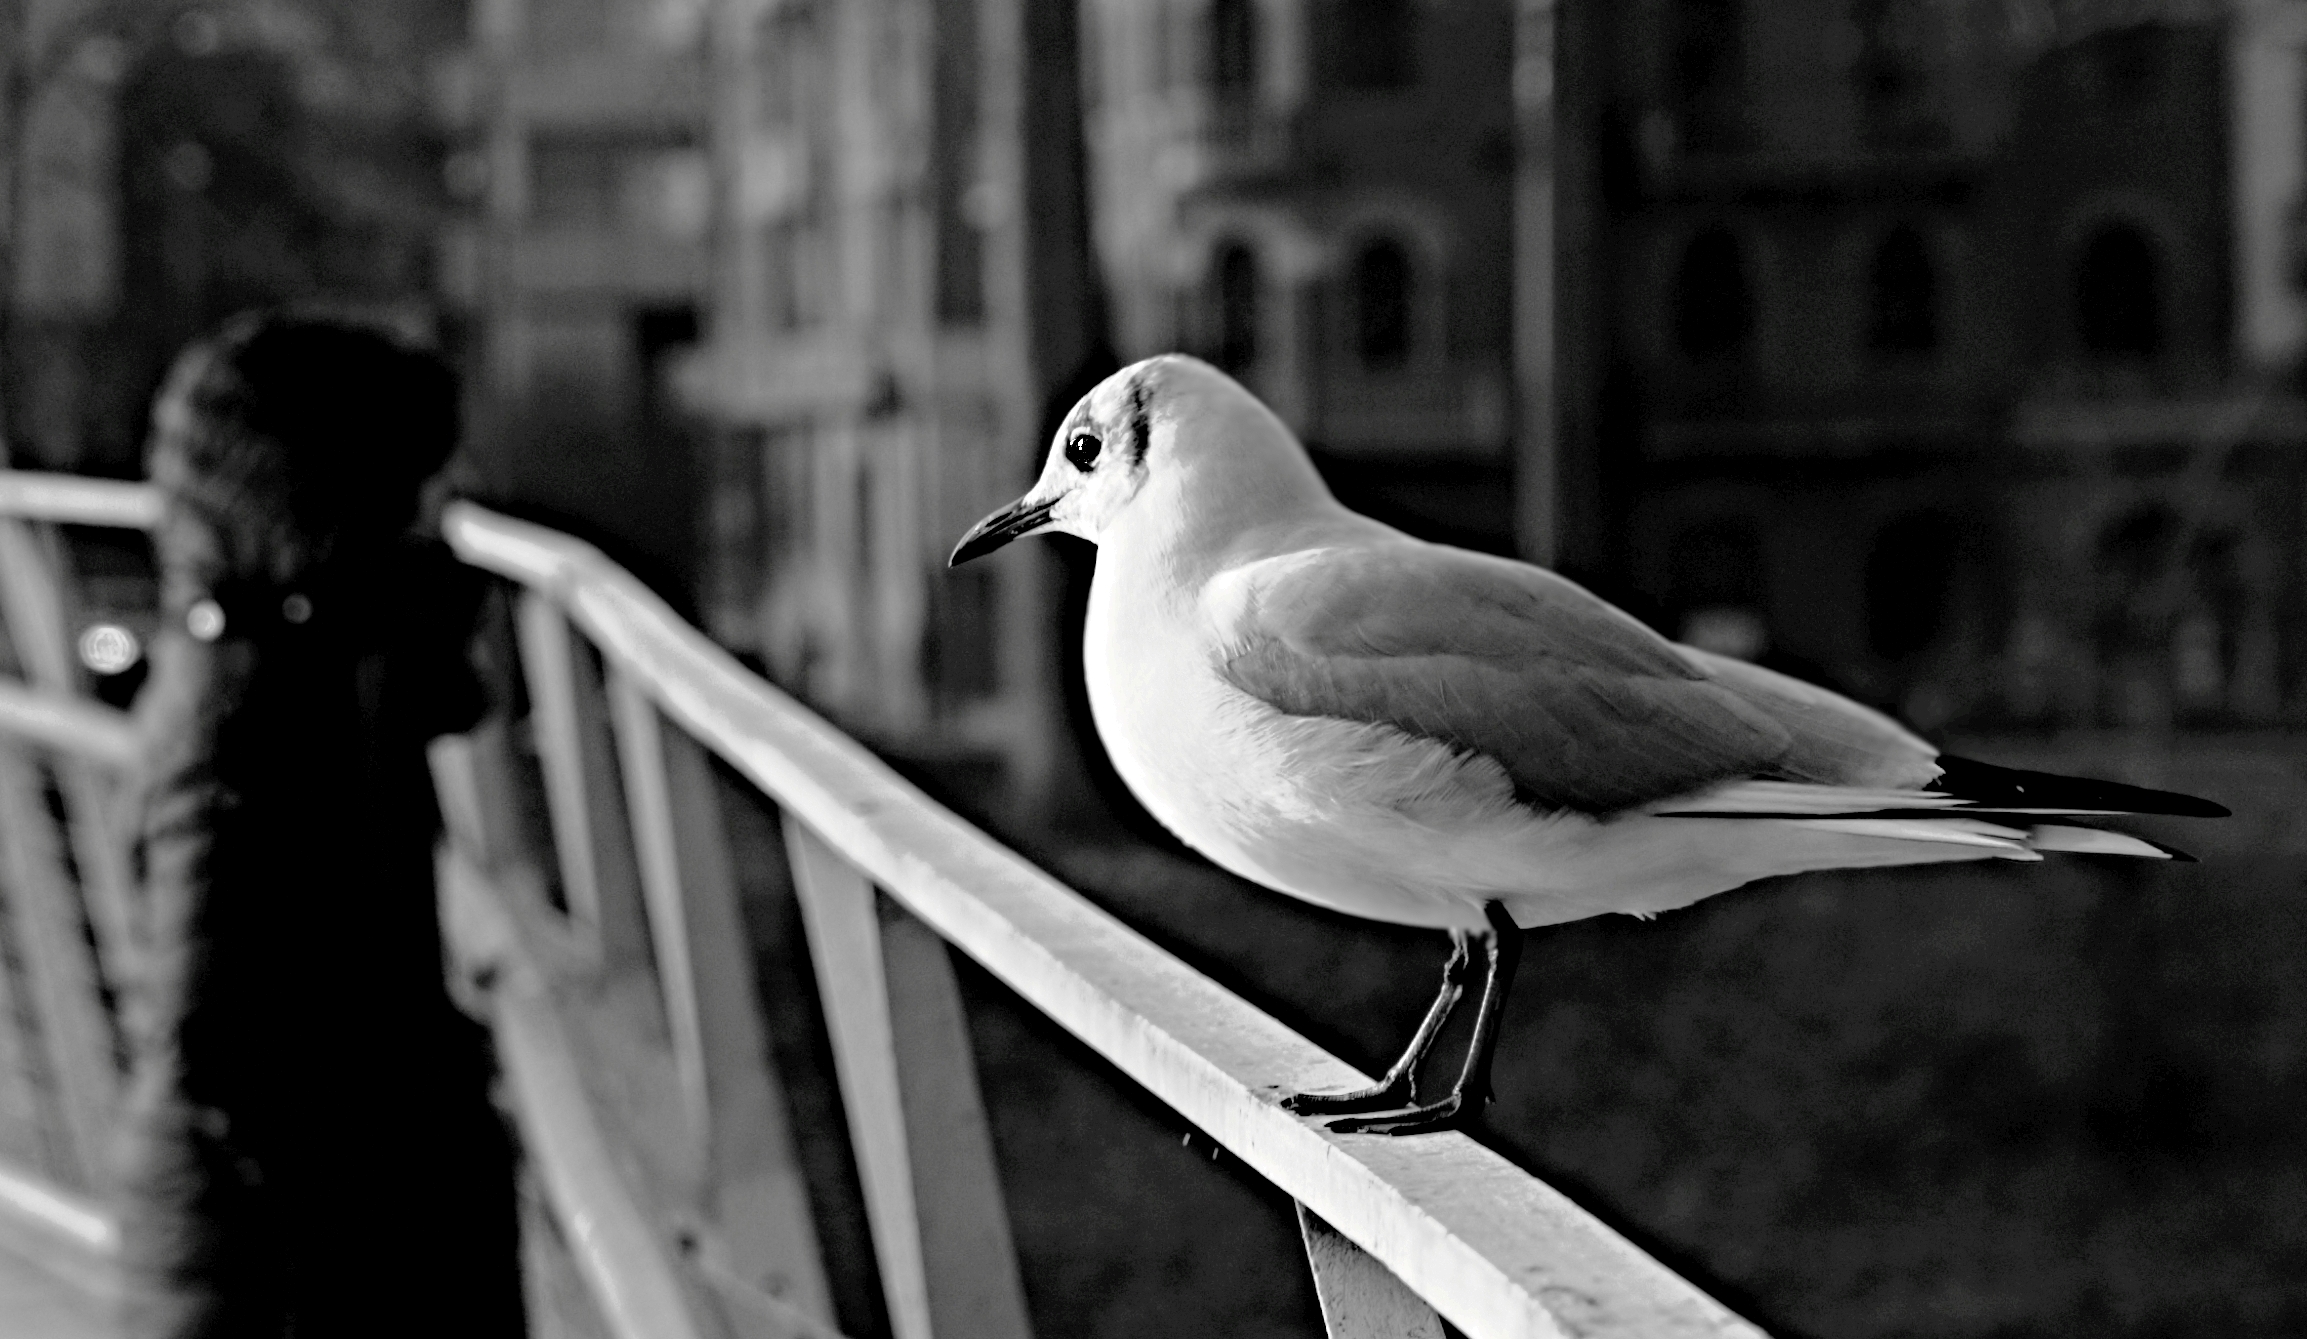 The Seagull of the city...